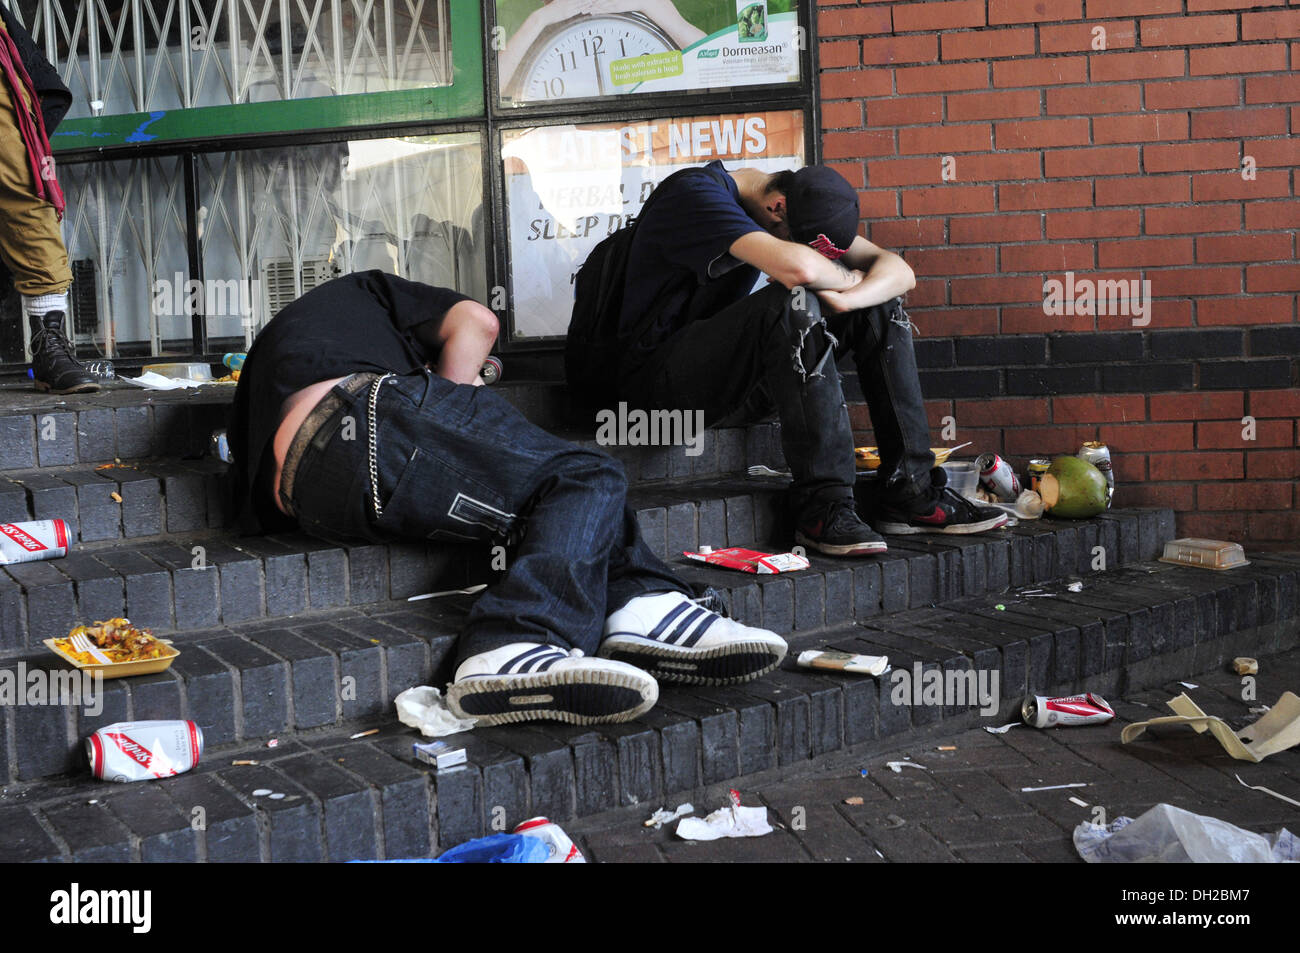 two-drunk-people-lay-on-the-floor-at-the-notting-hill-carnival-DH2BM7.jpg